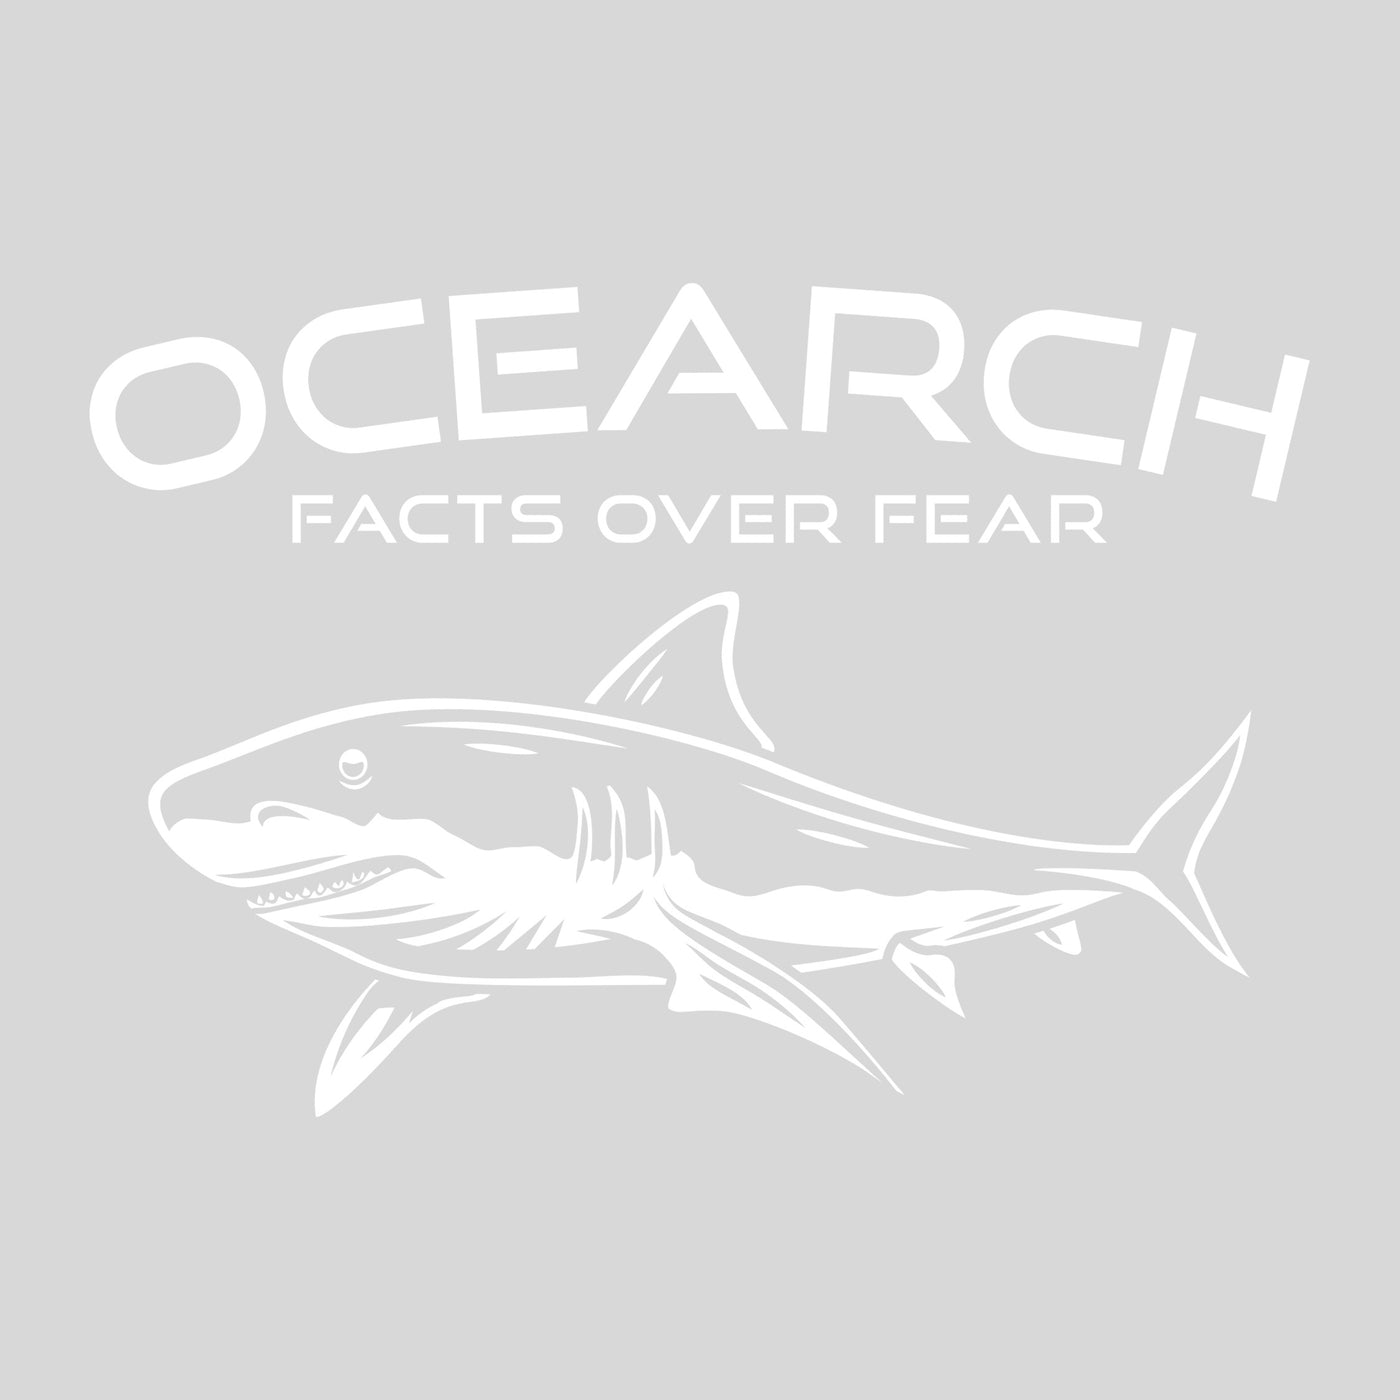 OCEARCH Vinyl Decal v.3 | Official OCEARCH Store